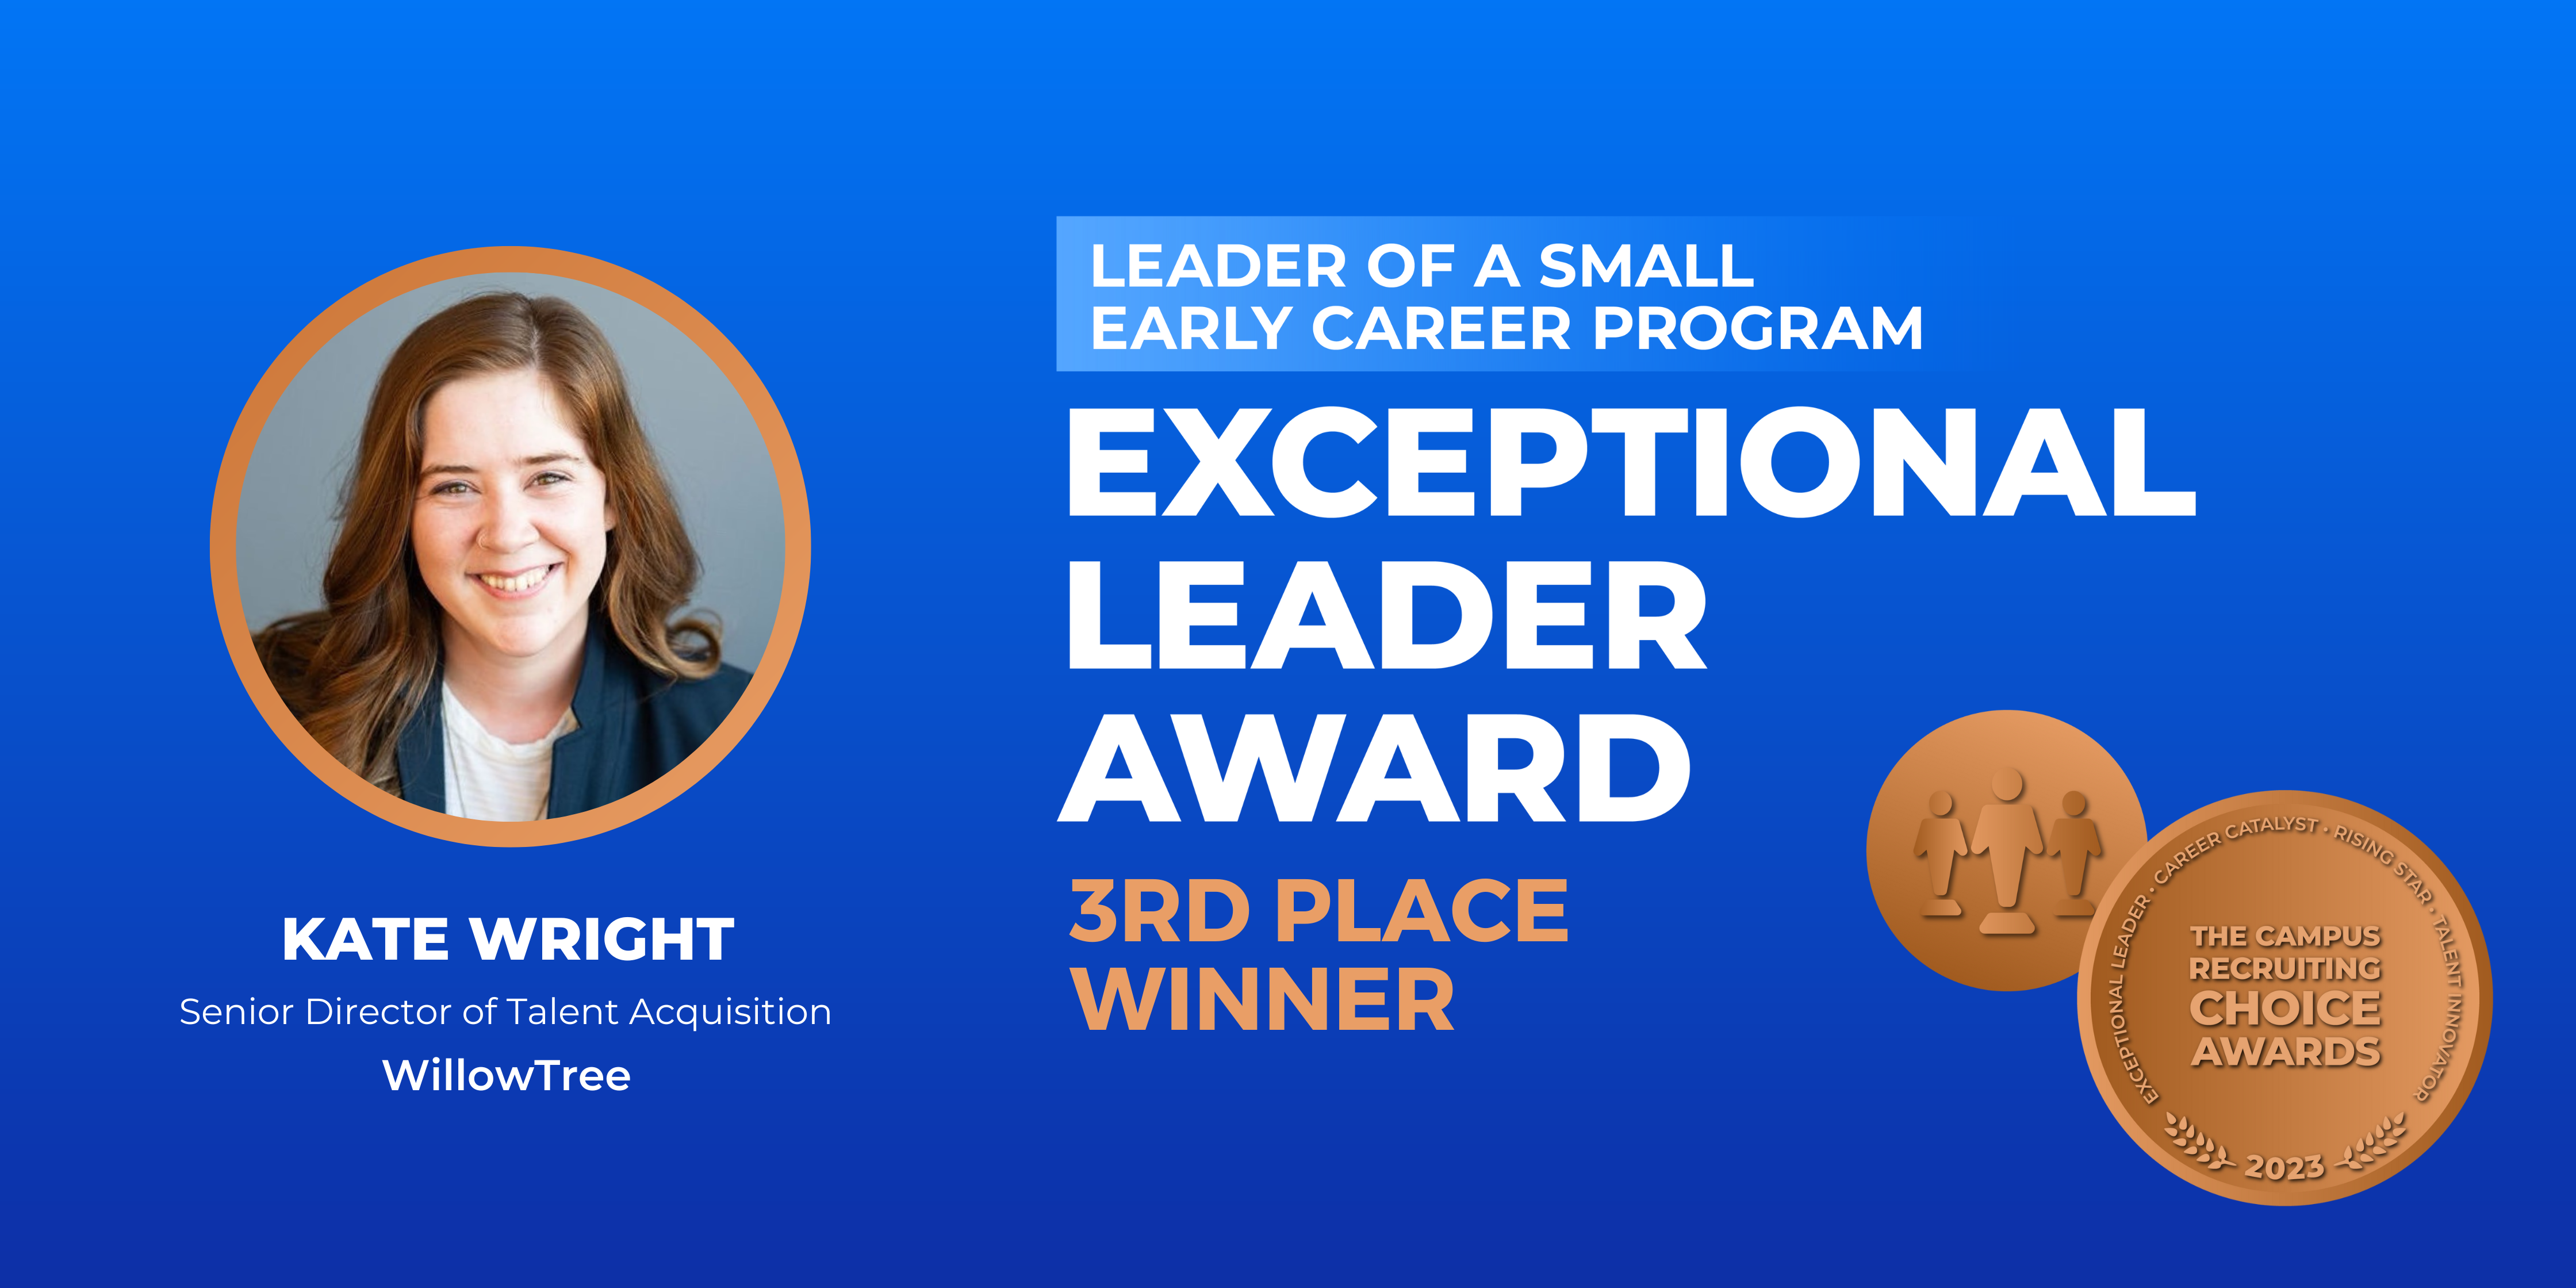 EXCEPTIONAL LEADER - Leader of a Small Early Career Program - 3rd Place Winner - Kate Wright